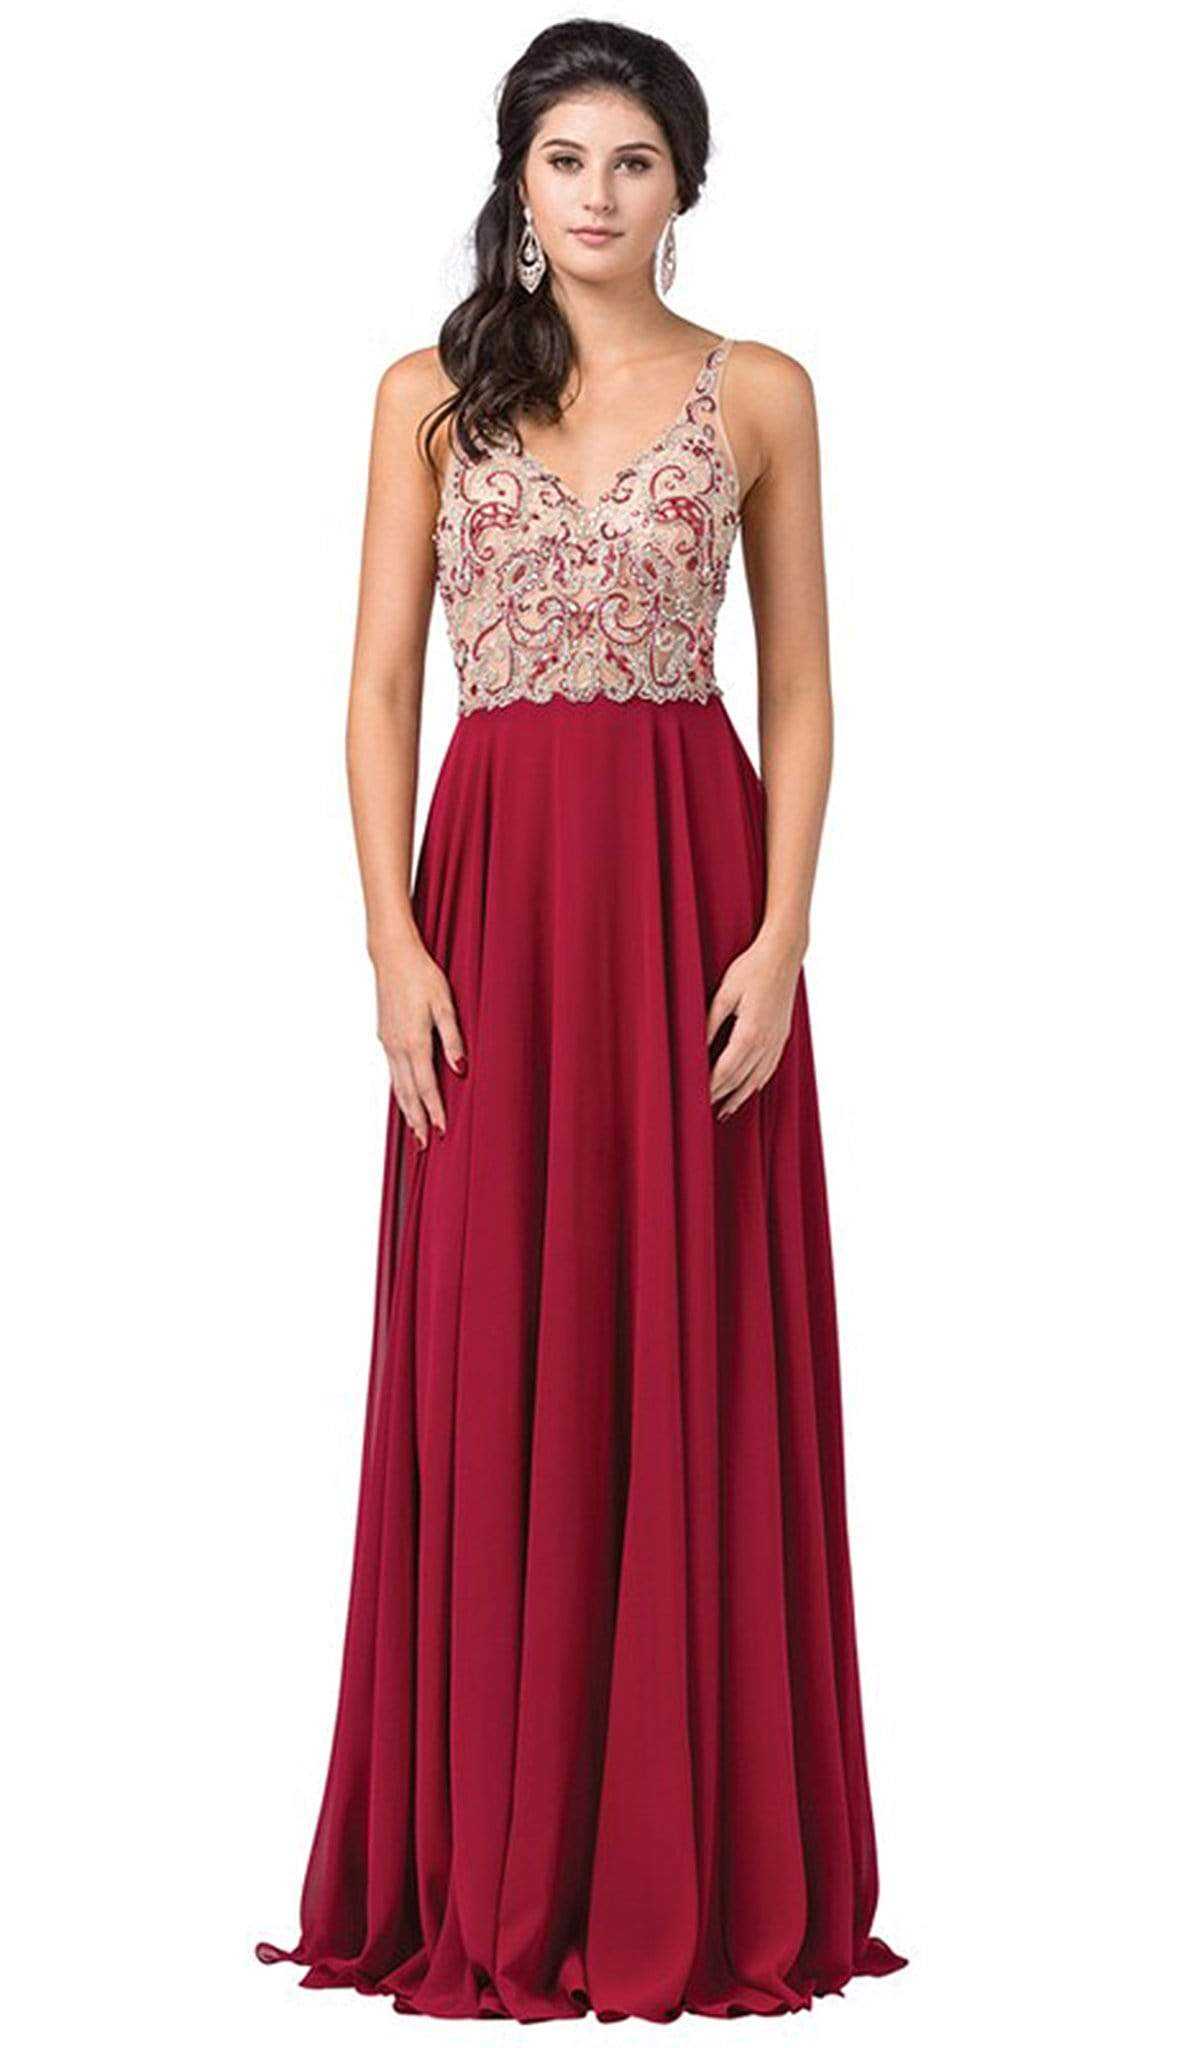 Dancing Queen, Dancing Queen - 2513 Beaded Embellished Illusion Bodice Chiffon Gown